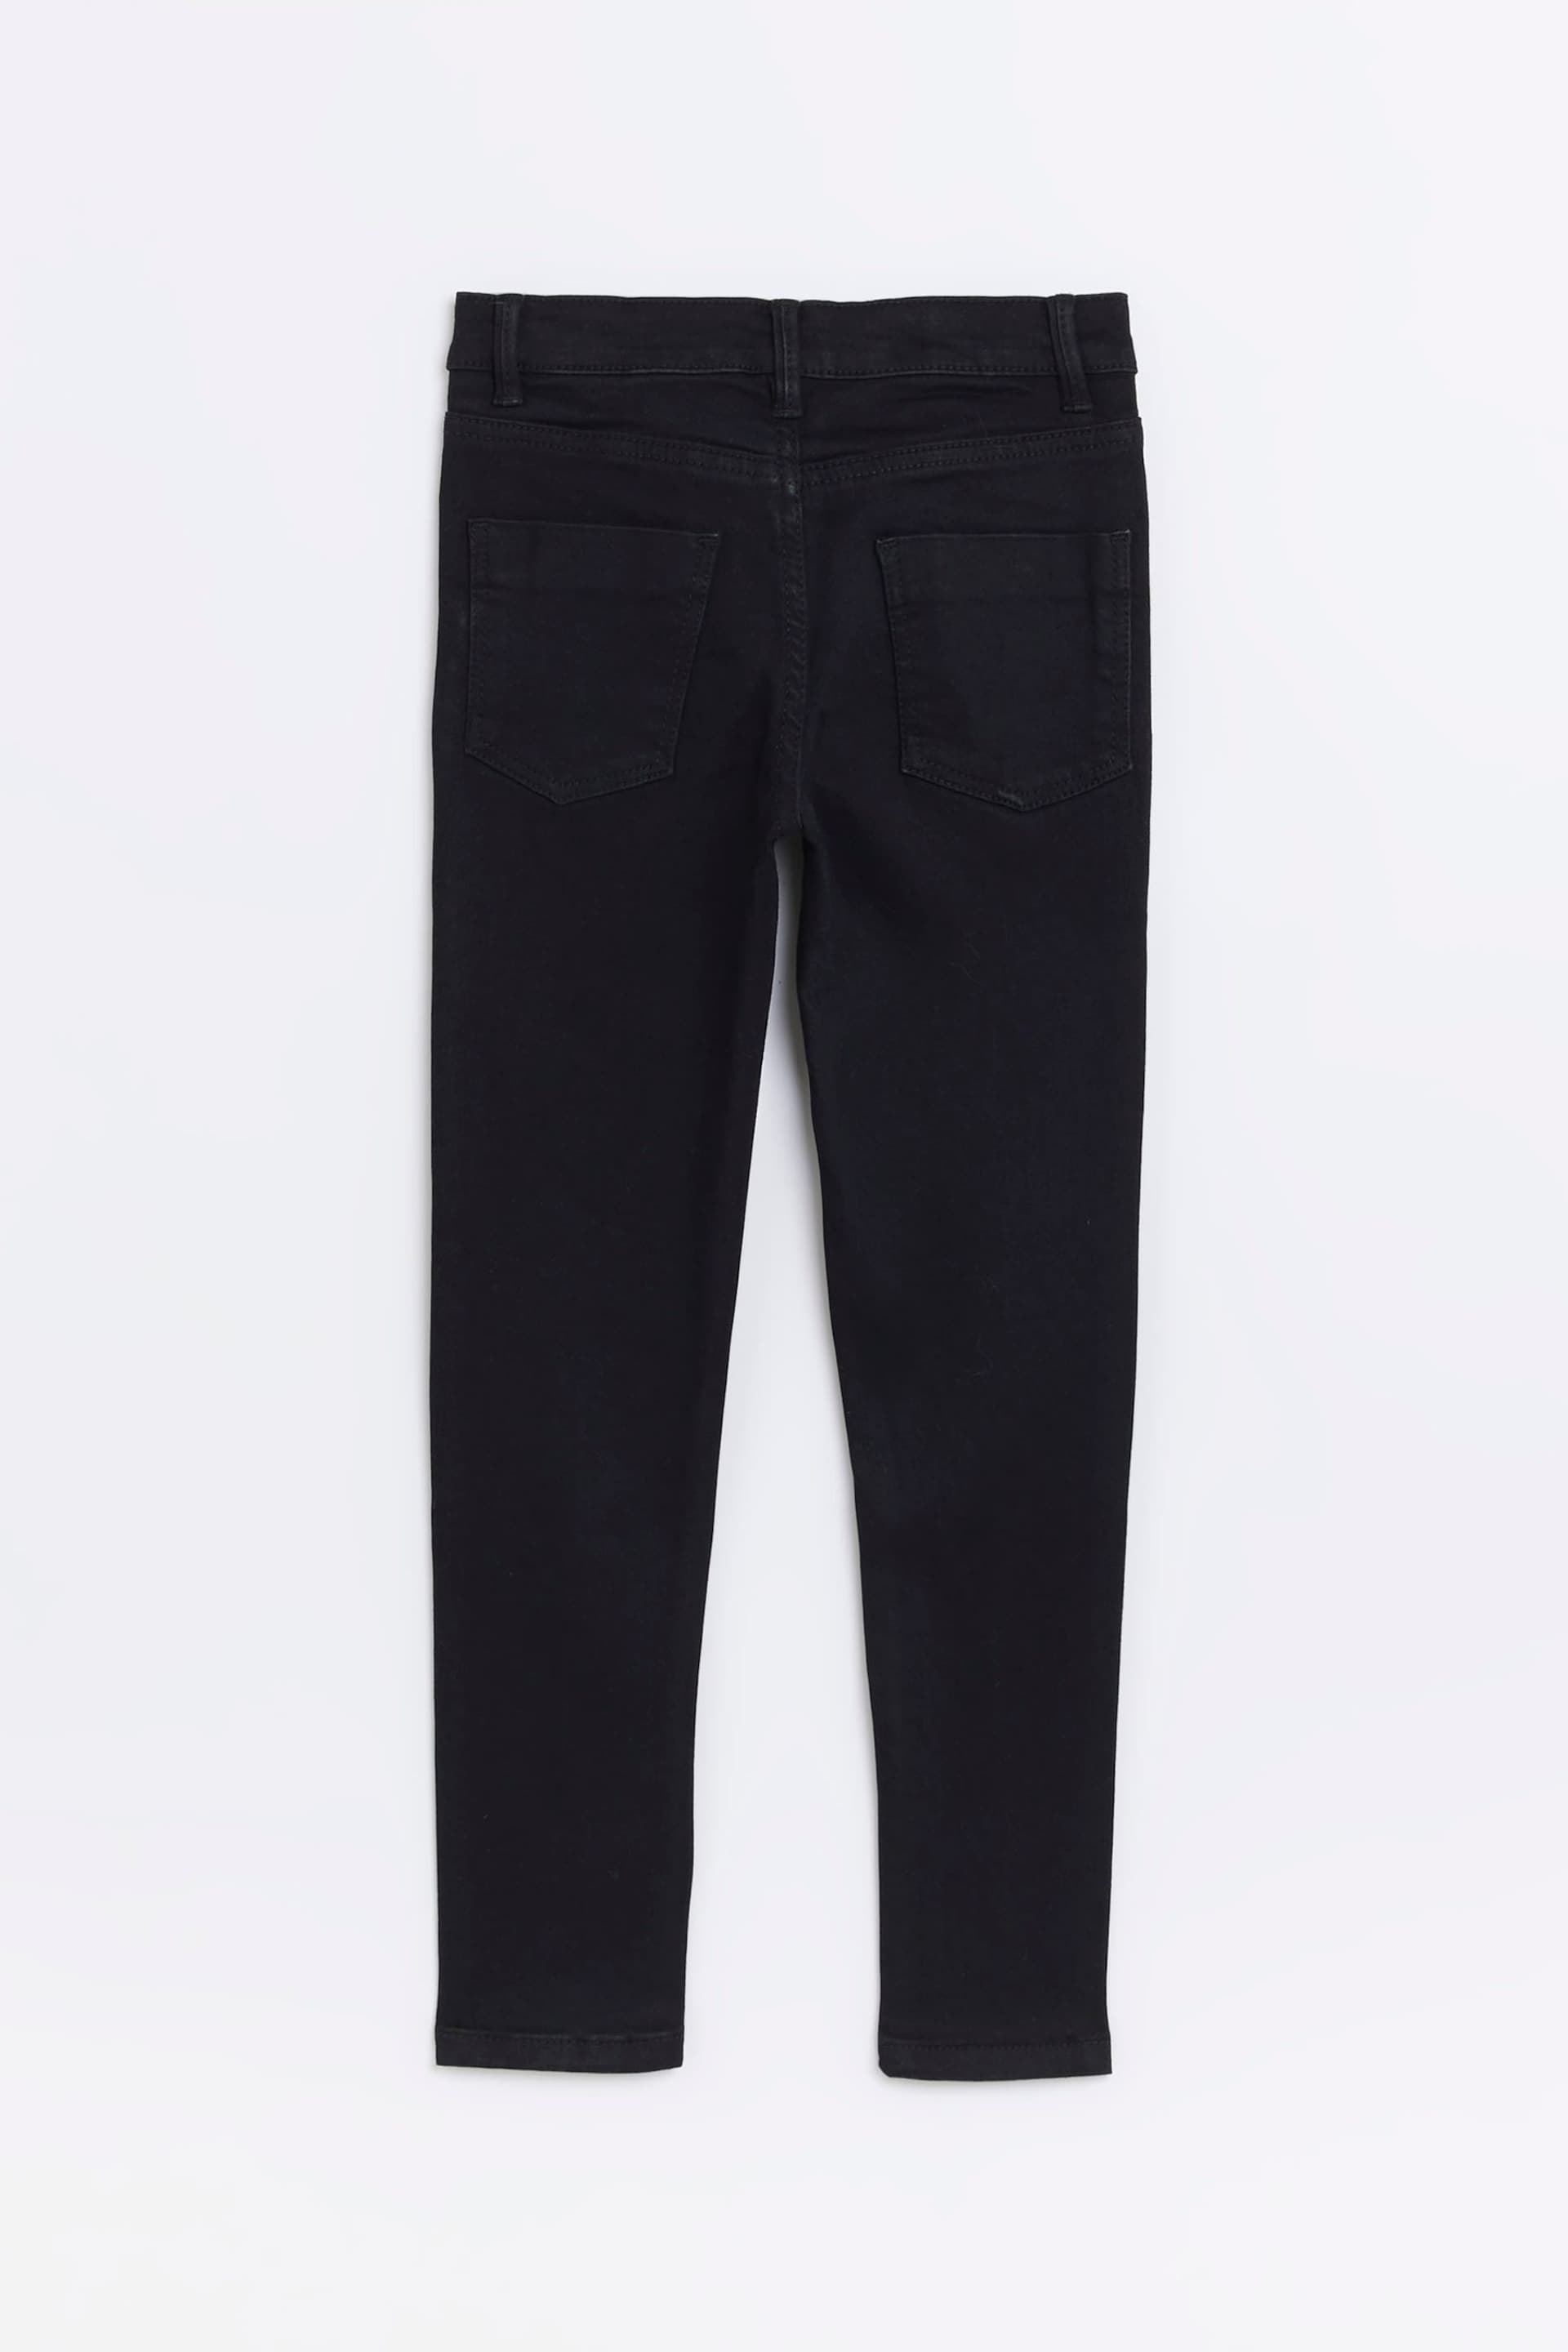 River Island Black Molly Skinny Jeans - Image 2 of 4